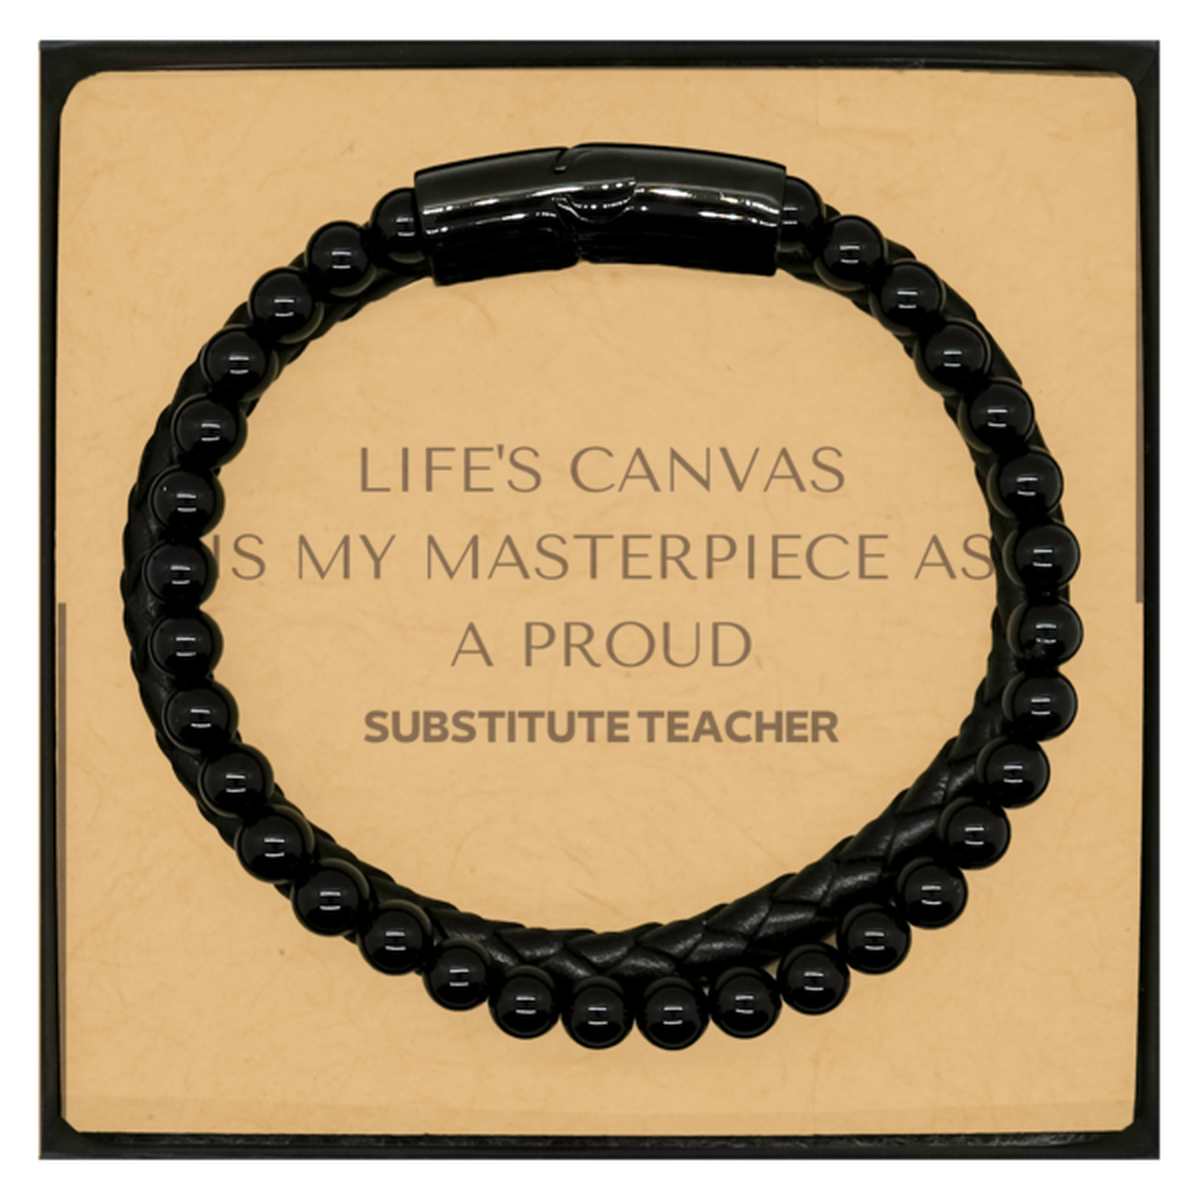 Proud Substitute Teacher Gifts, Life's canvas is my masterpiece, Epic Birthday Christmas Unique Stone Leather Bracelets For Substitute Teacher, Coworkers, Men, Women, Friends